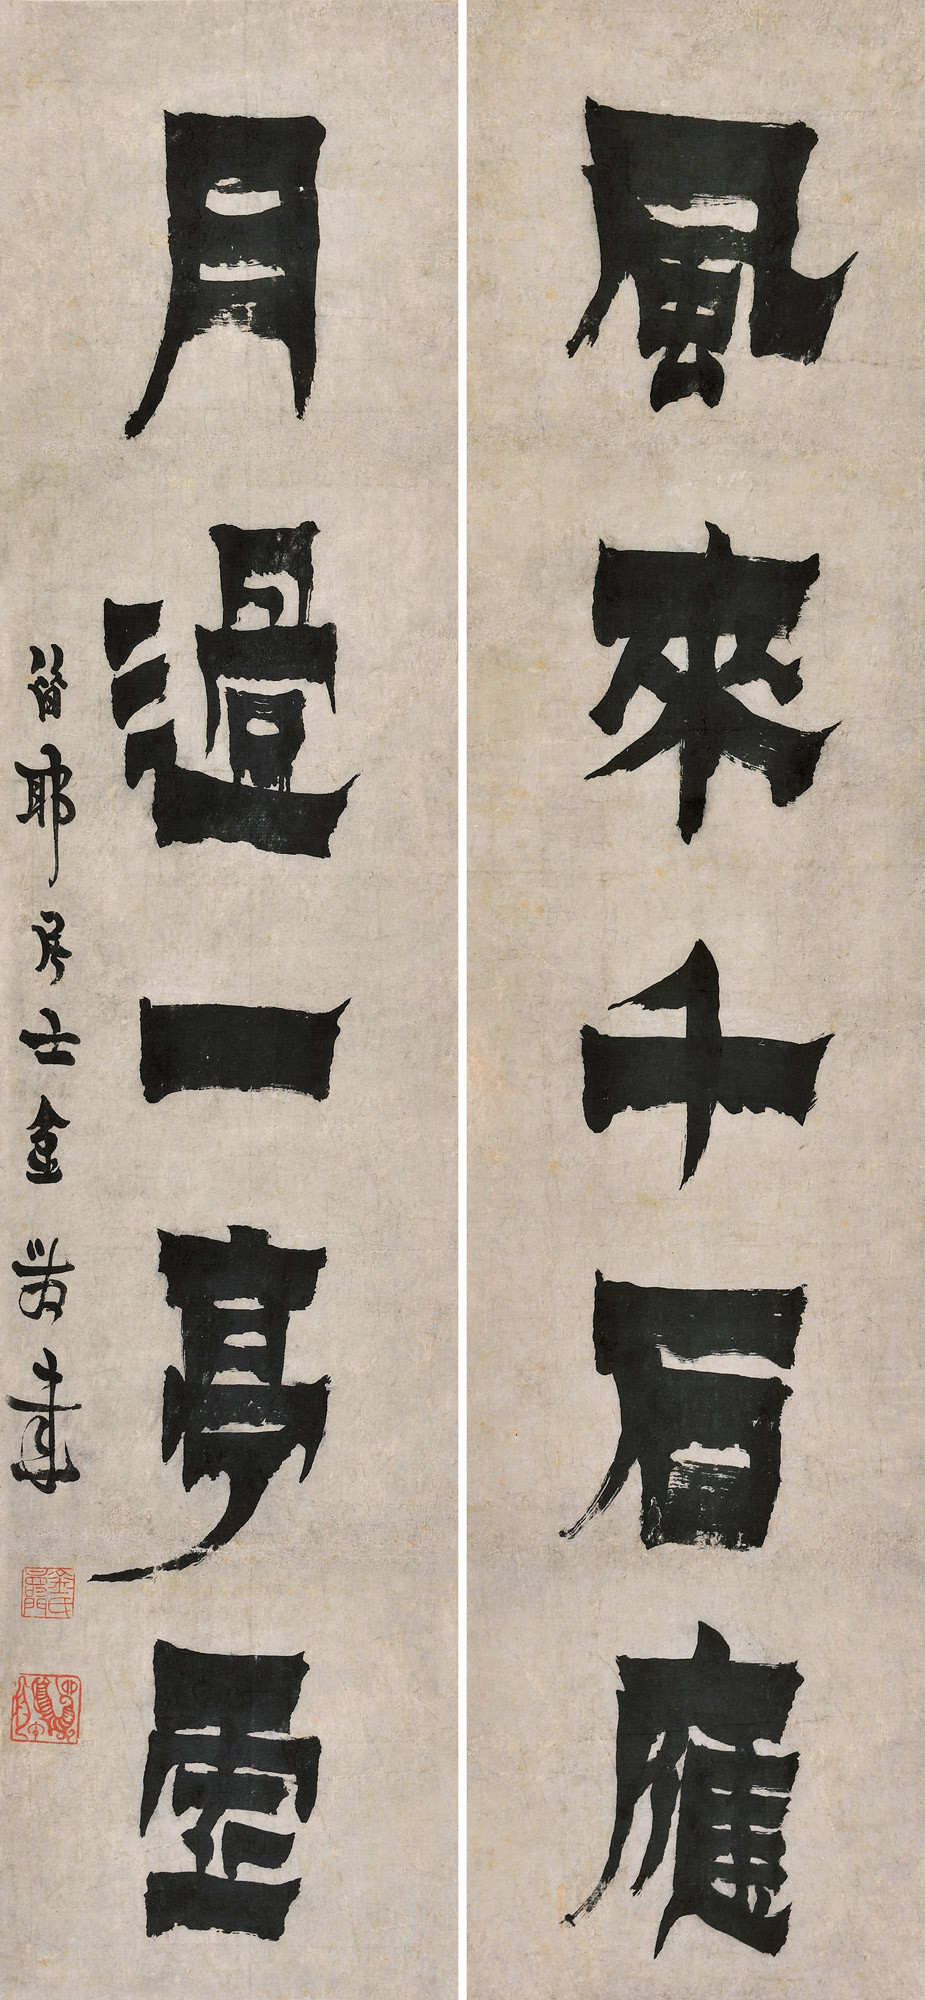 FIVE-CHARACTER CALLIGRAPHY COUPLET IN OFFICIAL SCRIPT